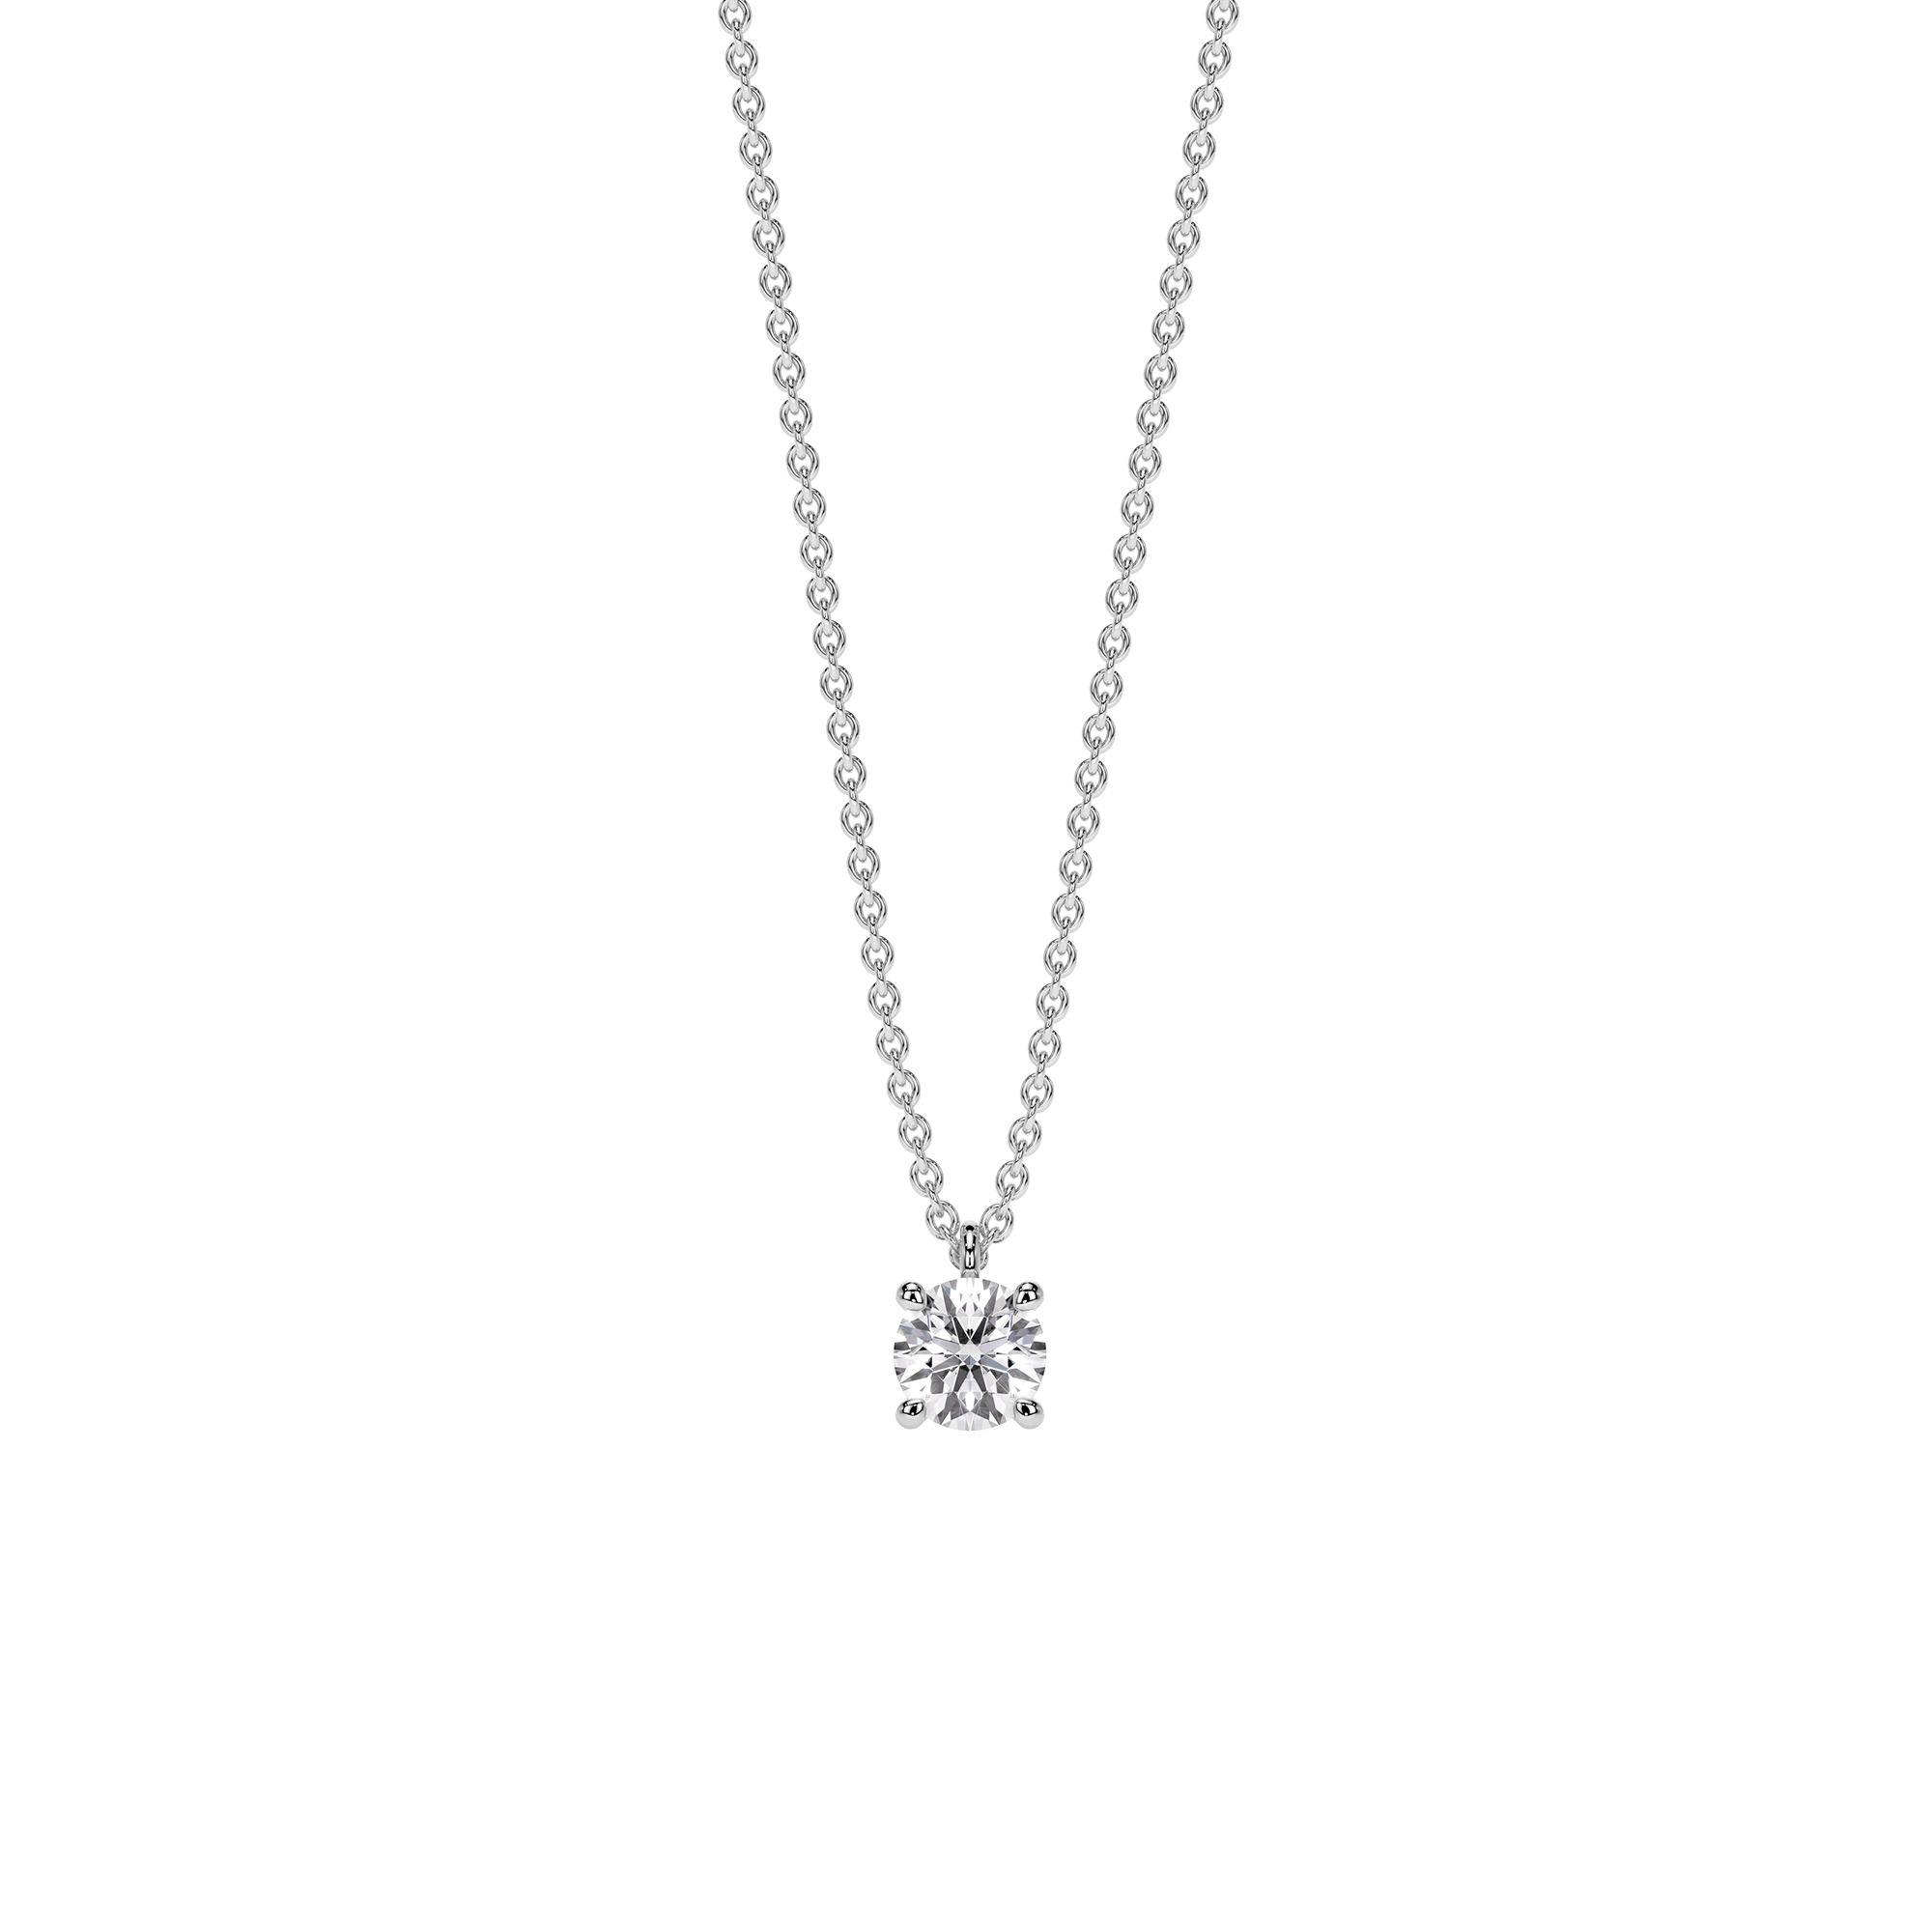 14 k white gold Solitaire necklace, with 1 white 0.50 ct diamond